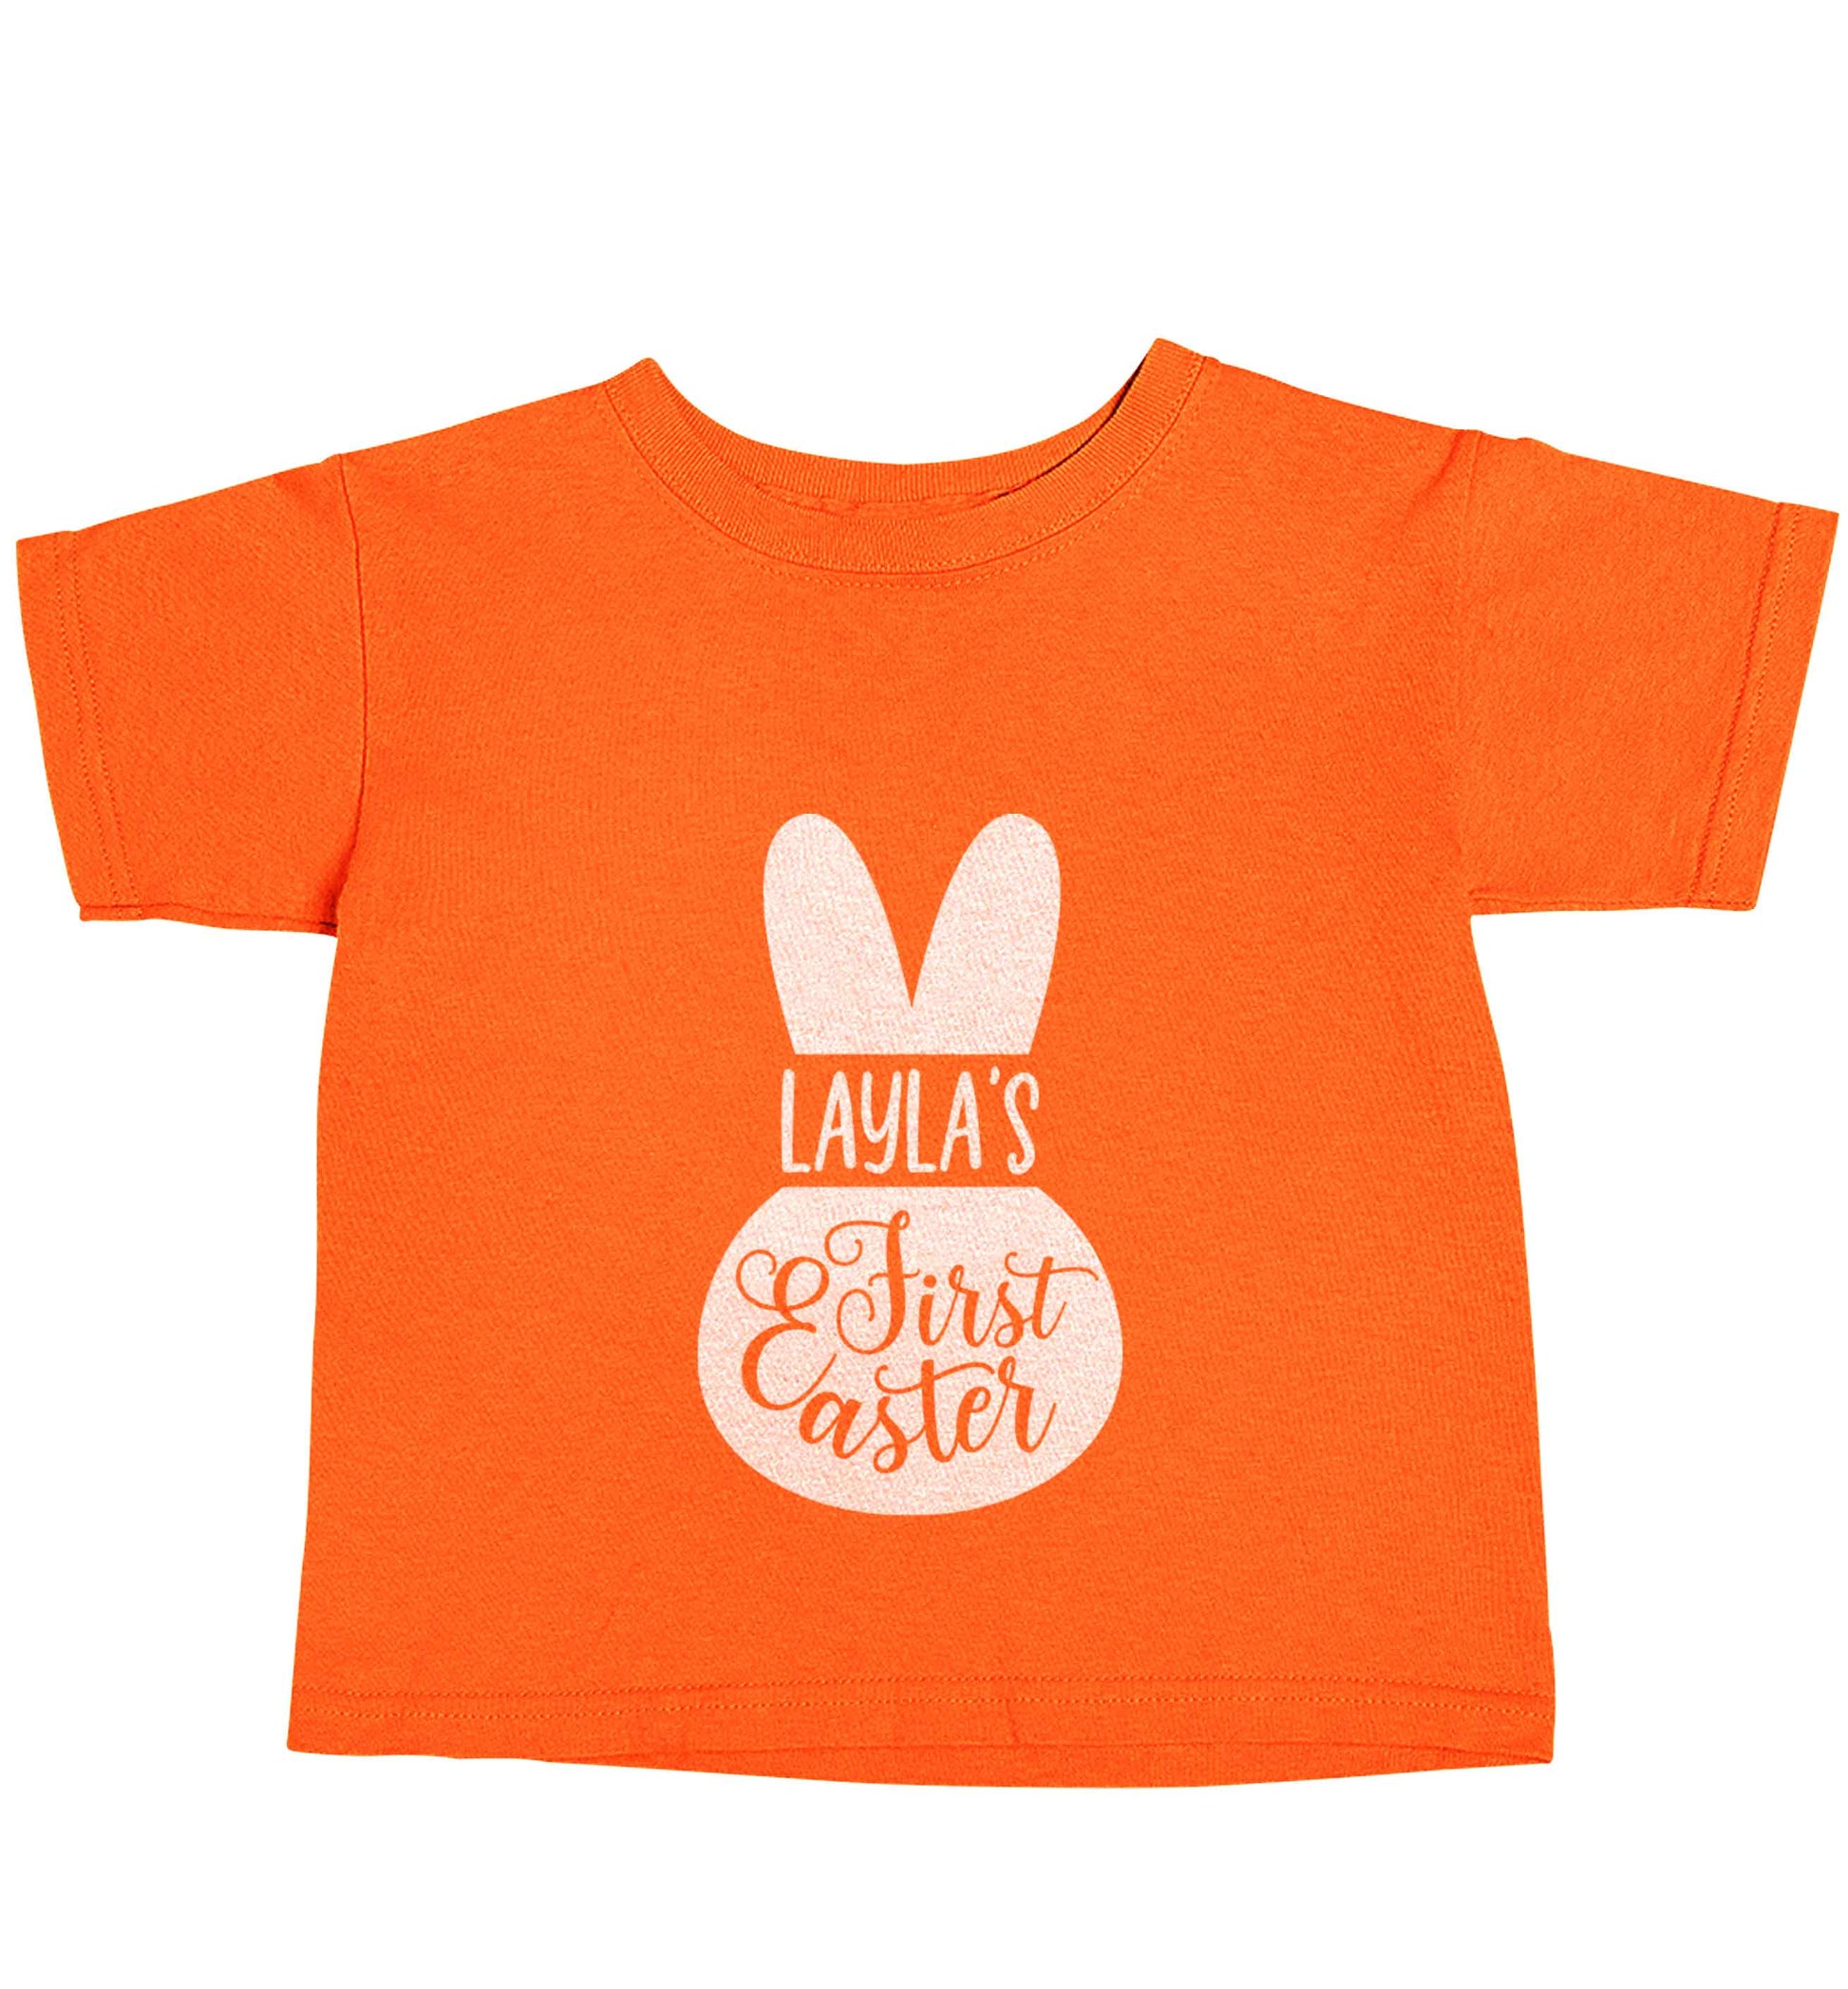 Personalised first Easter - pink bunny orange baby toddler Tshirt 2 Years